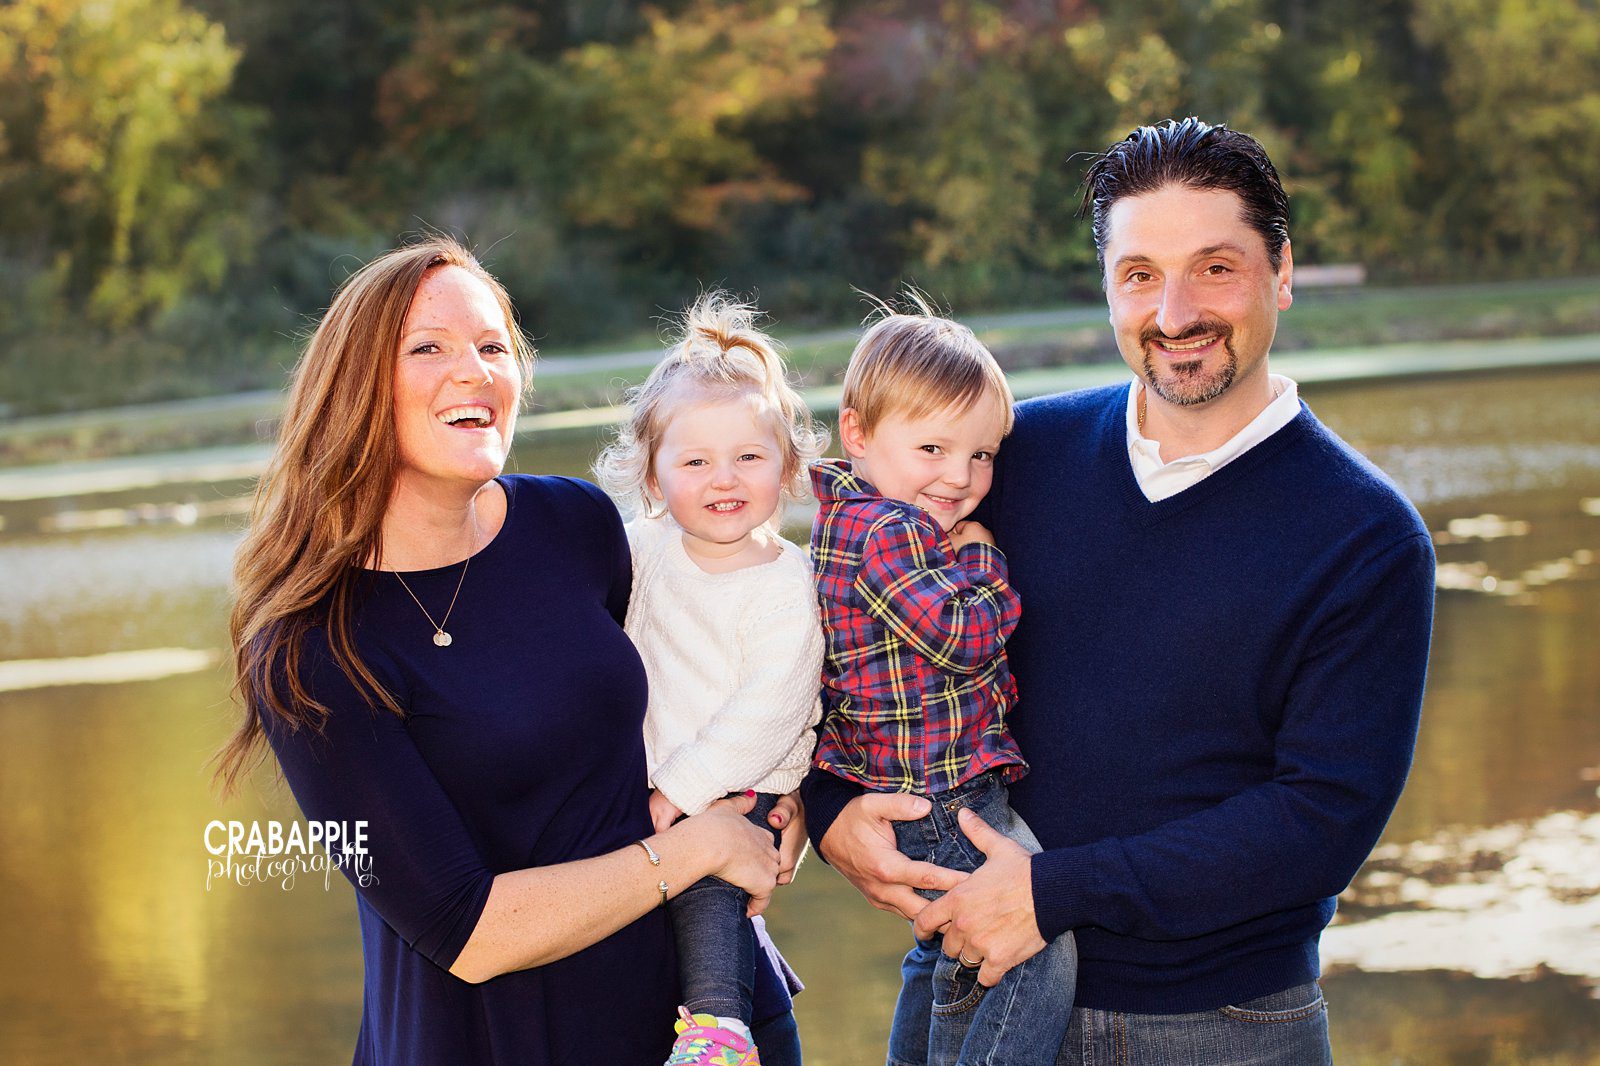 outdoor family portraits photos at the park